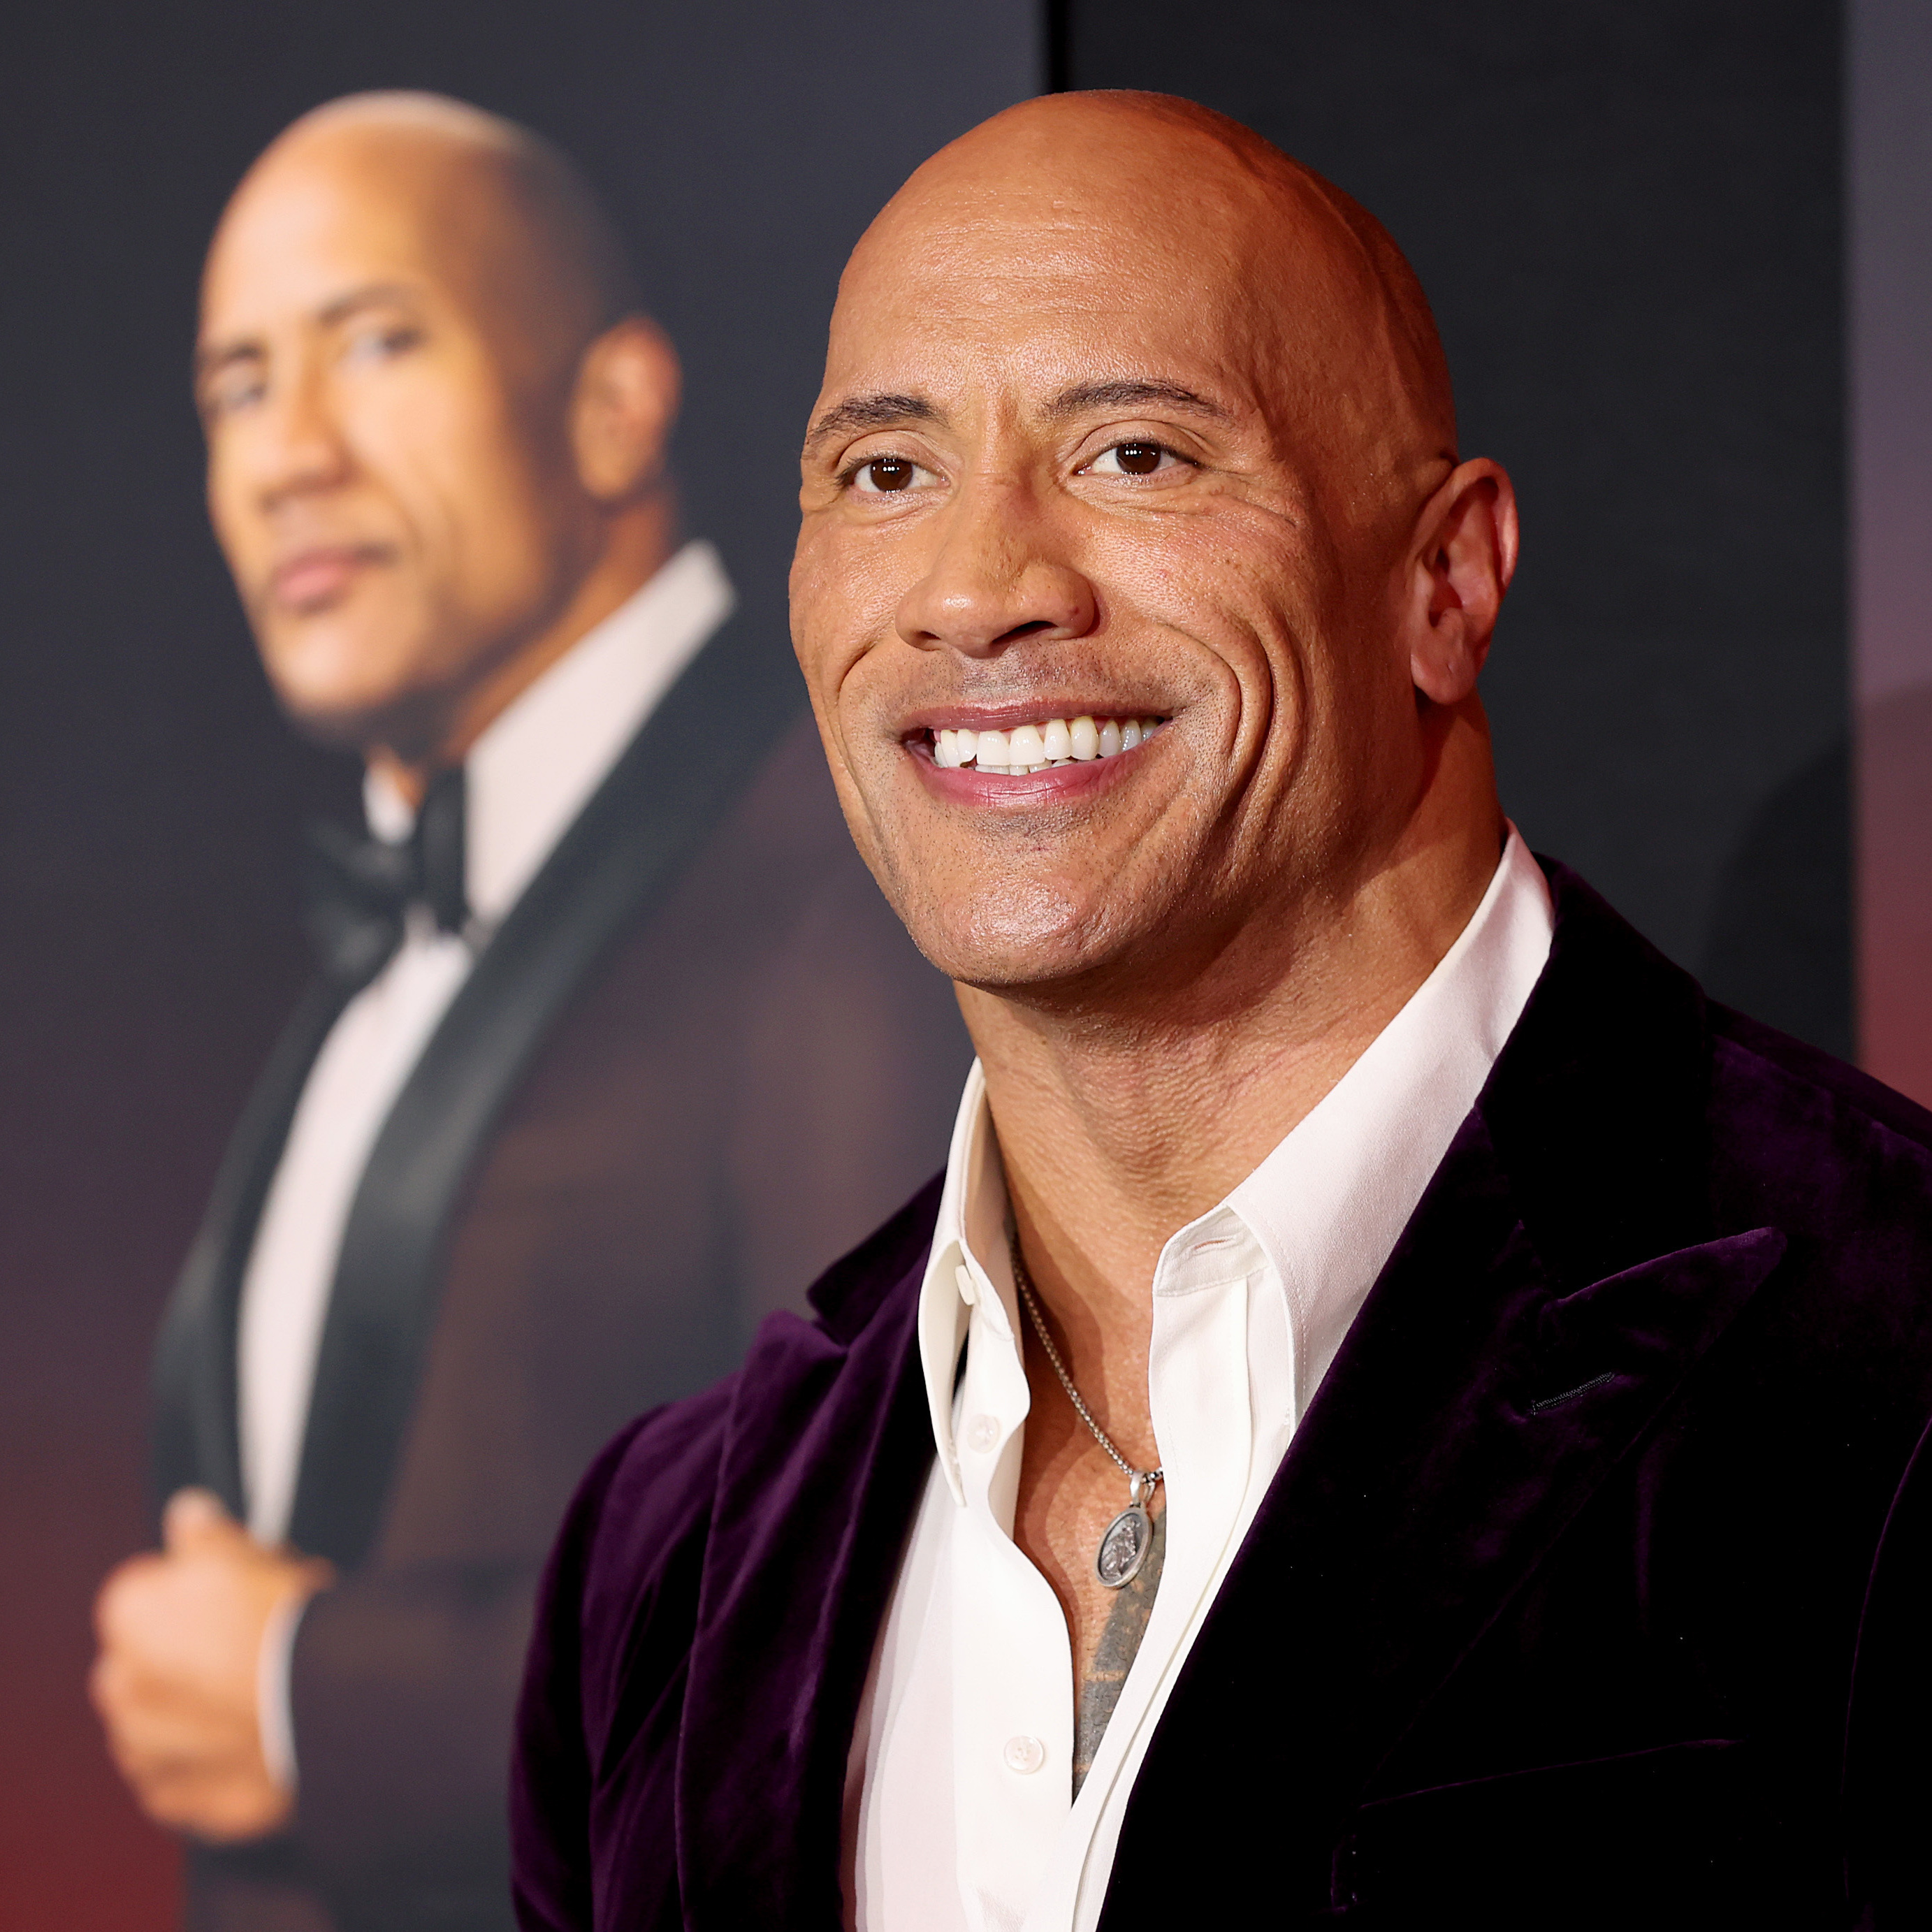 Bring it! Dwayne 'The Rock' Johnson is the Sexiest Man Alive